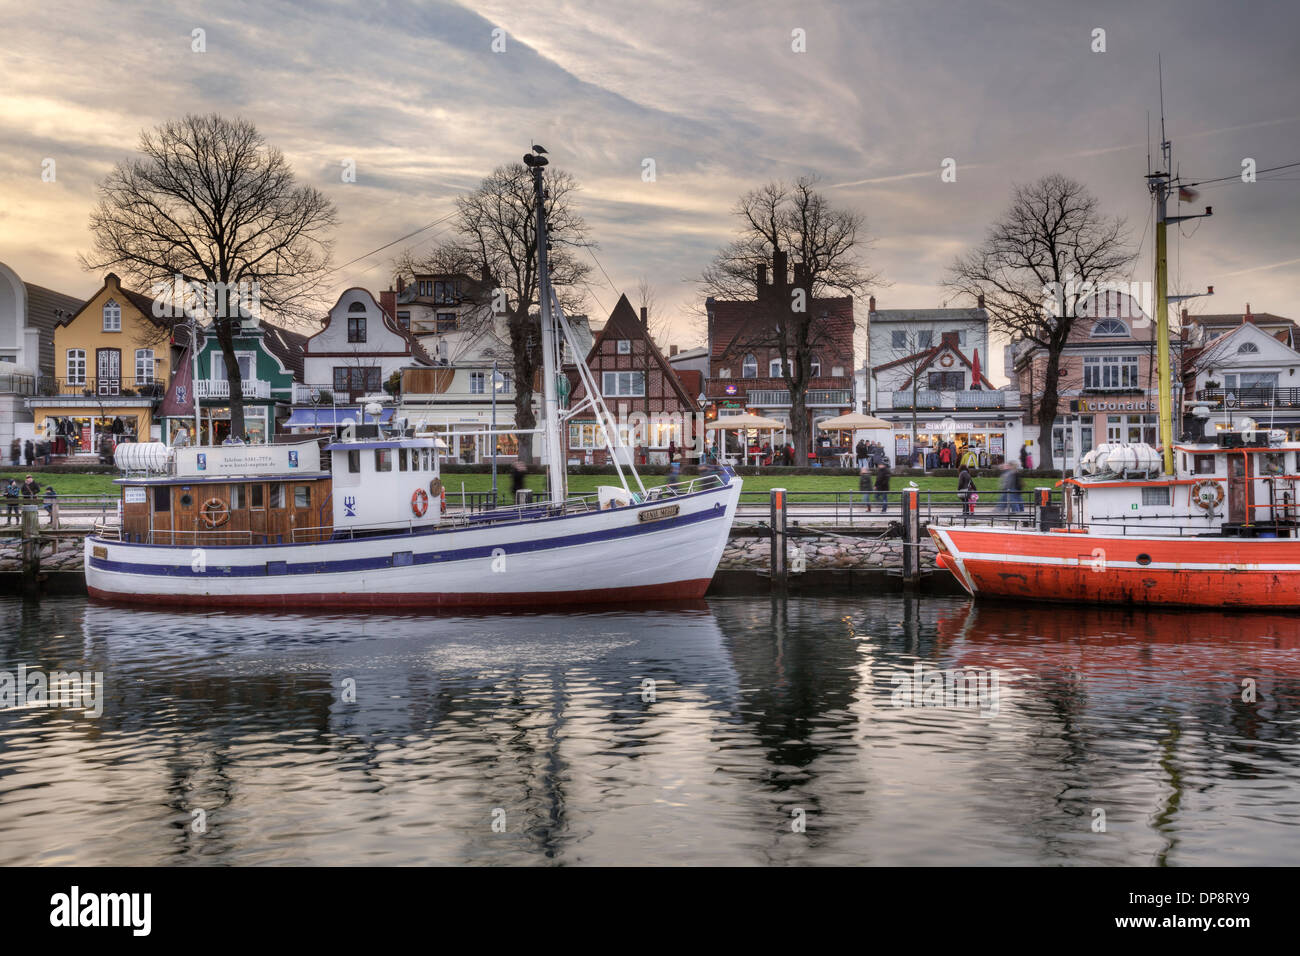 Old buildings and boats on the Alter Strom, Warnemuende, Mecklenburg Vorpommern, Germany Stock Photo